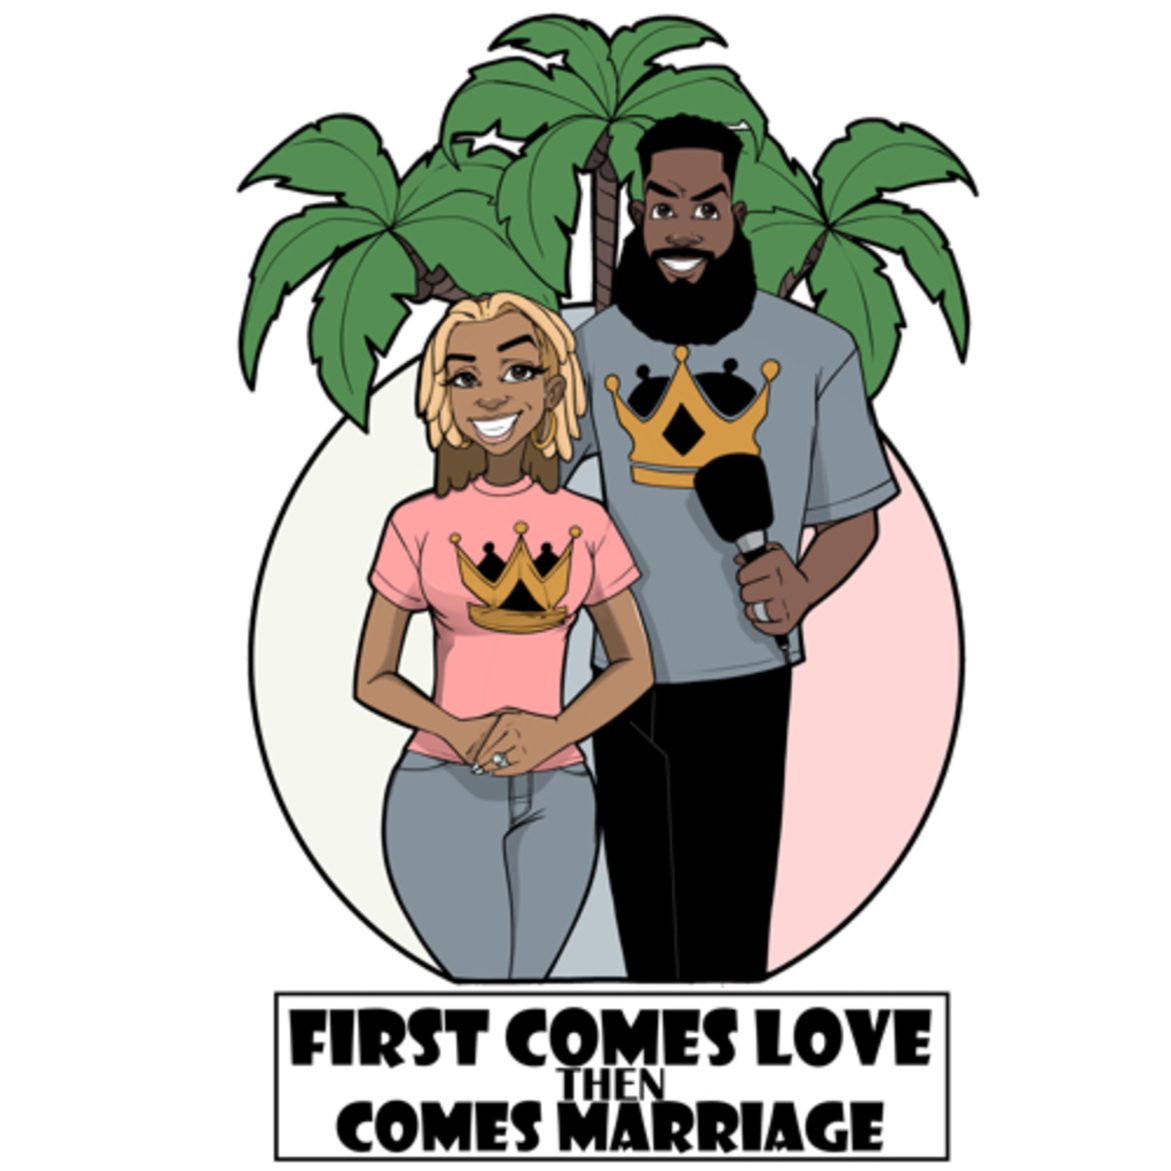 Black Podcasting - "Love Means Never Having to Say You're Sorry" - True or Toxic? | First Comes Love, Then Comes Marriage S5E12